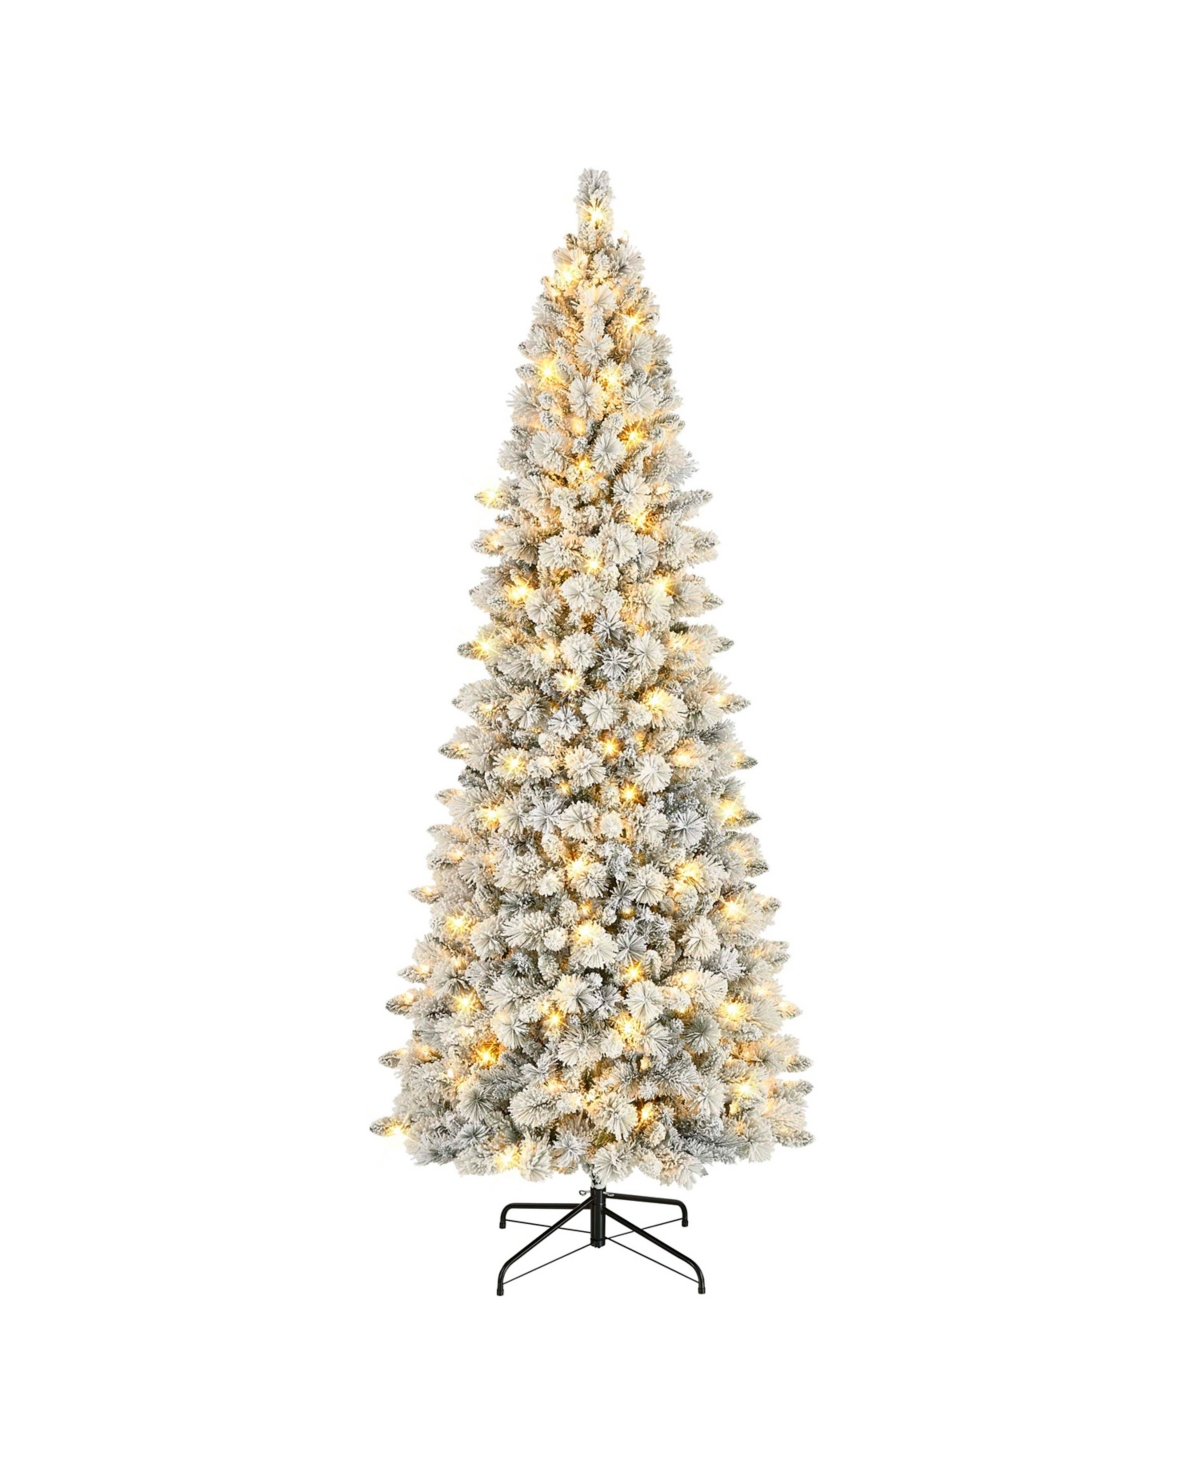 Puleo 9' Pre-lit Flocked Alberta Spruce Tree With 450 Warm White Led Lights, 1382 Tips In Green